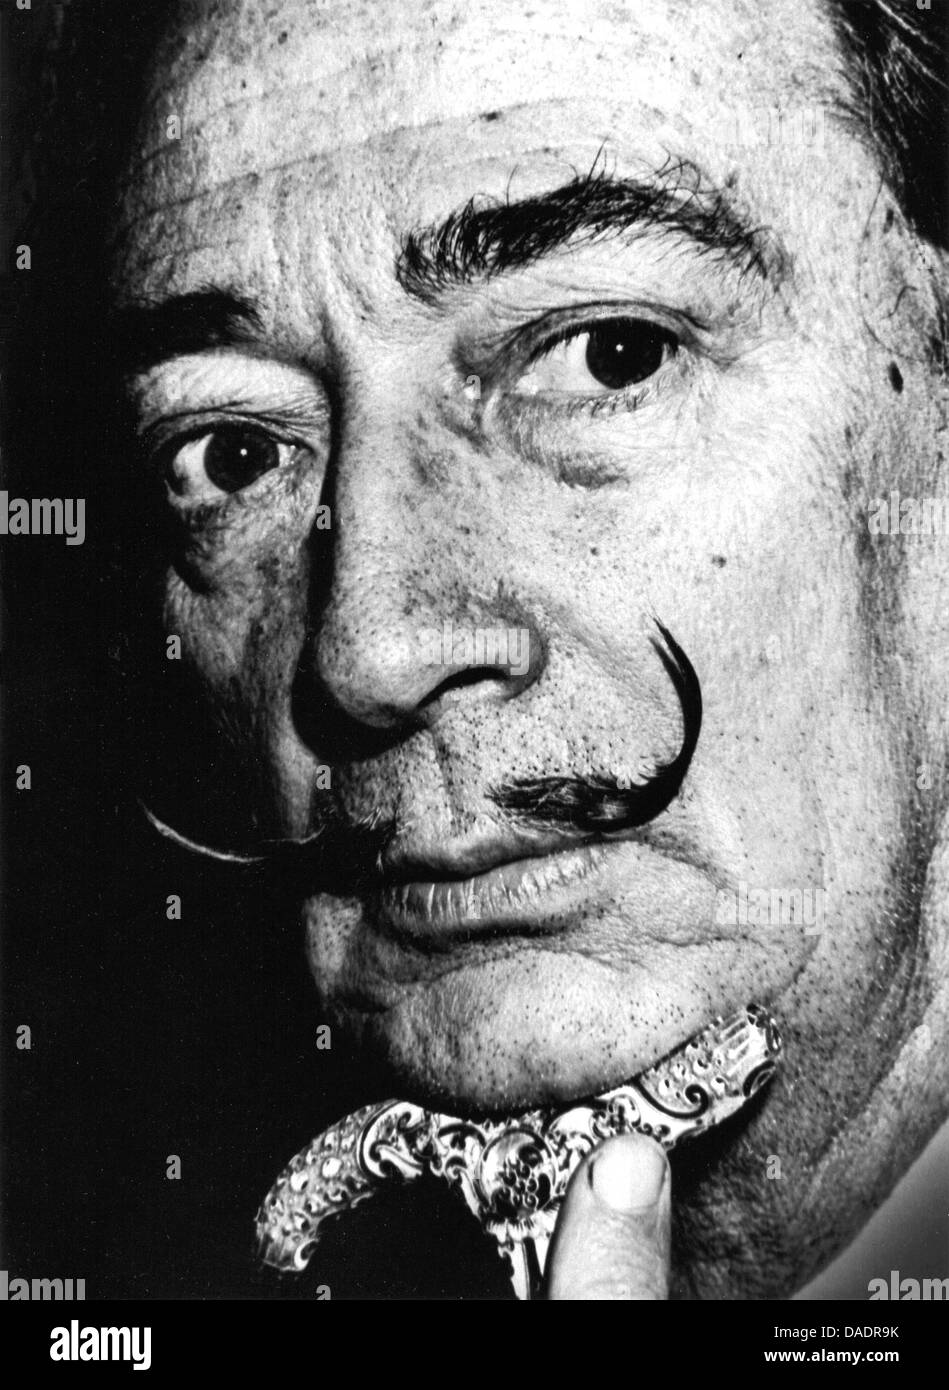 Spanish artist Salvador dali in 1963. Portrait by photographer Fred Stein (1909-1967) who emigrated 1933 from Nazi Germany to France and finally to the USA. Stock Photo